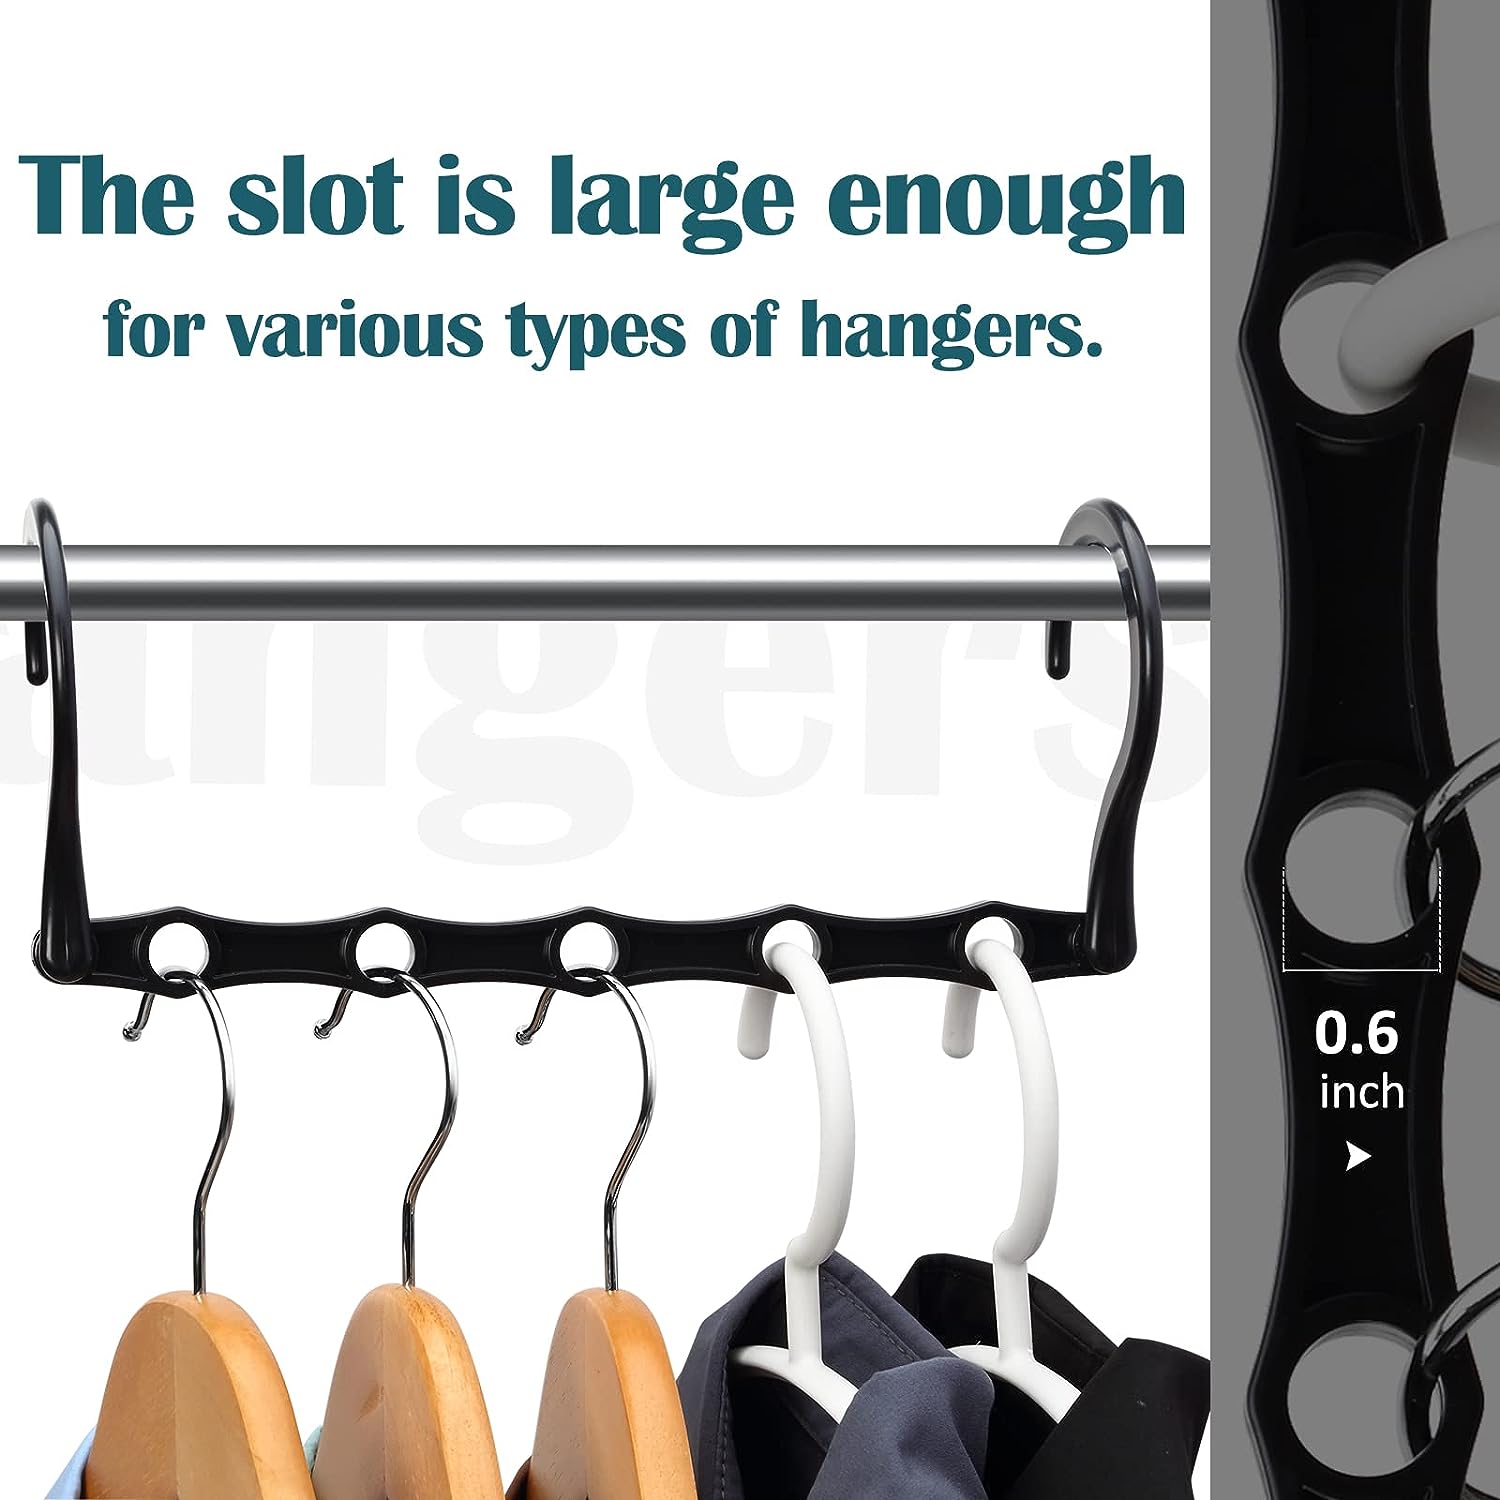 1pc Space Saving Clothes Hanger, Closet Metal Magic Hook, Multiple Hangers  Combined Into One, Great For Saving Storage Space And Organizing Wardrobes  In Apartments And College Dorm Rooms